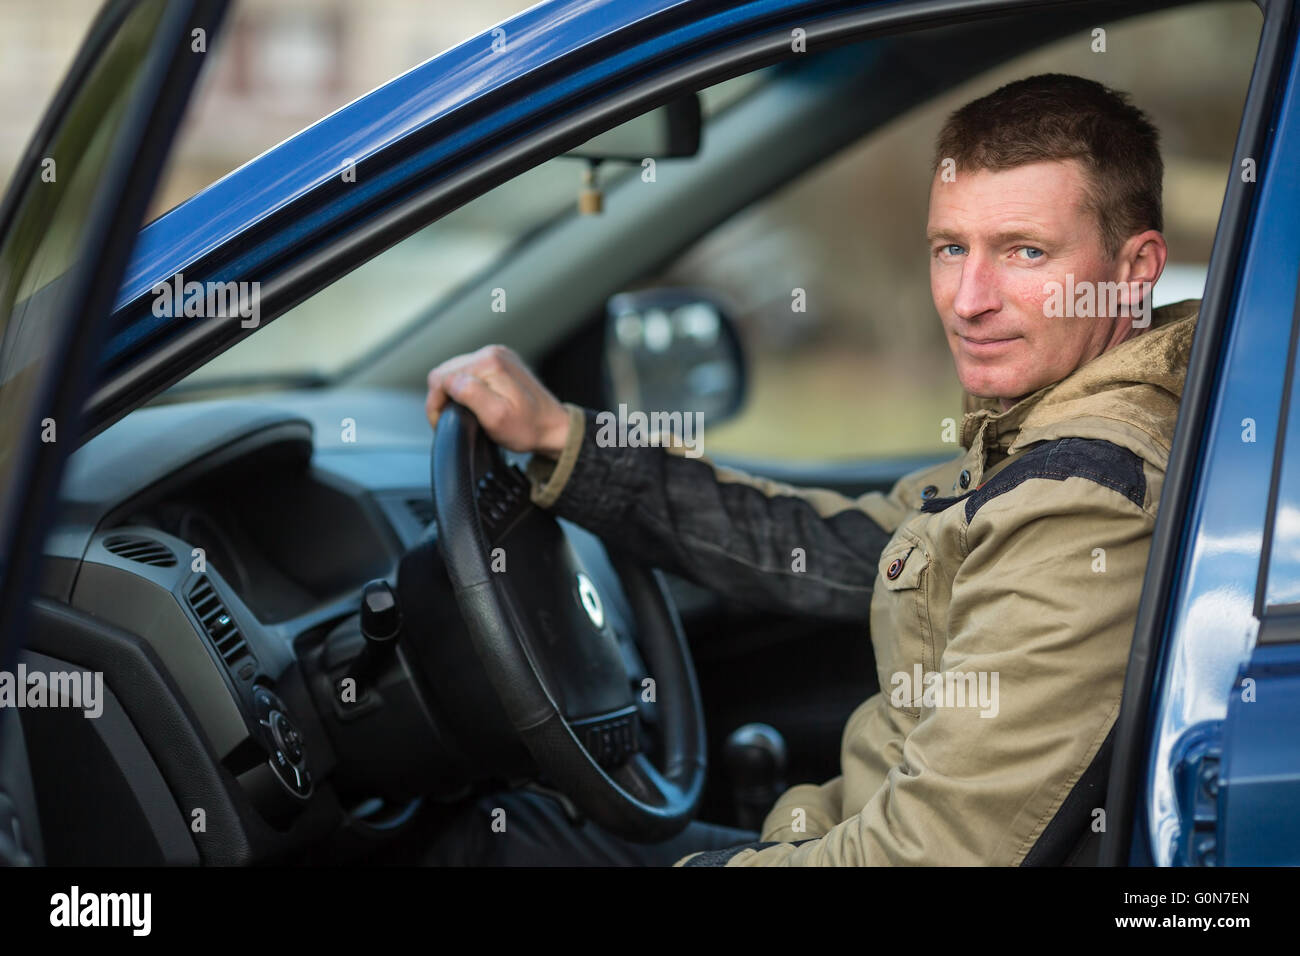 A young man sits behind the wheel of a car. Stock Photo